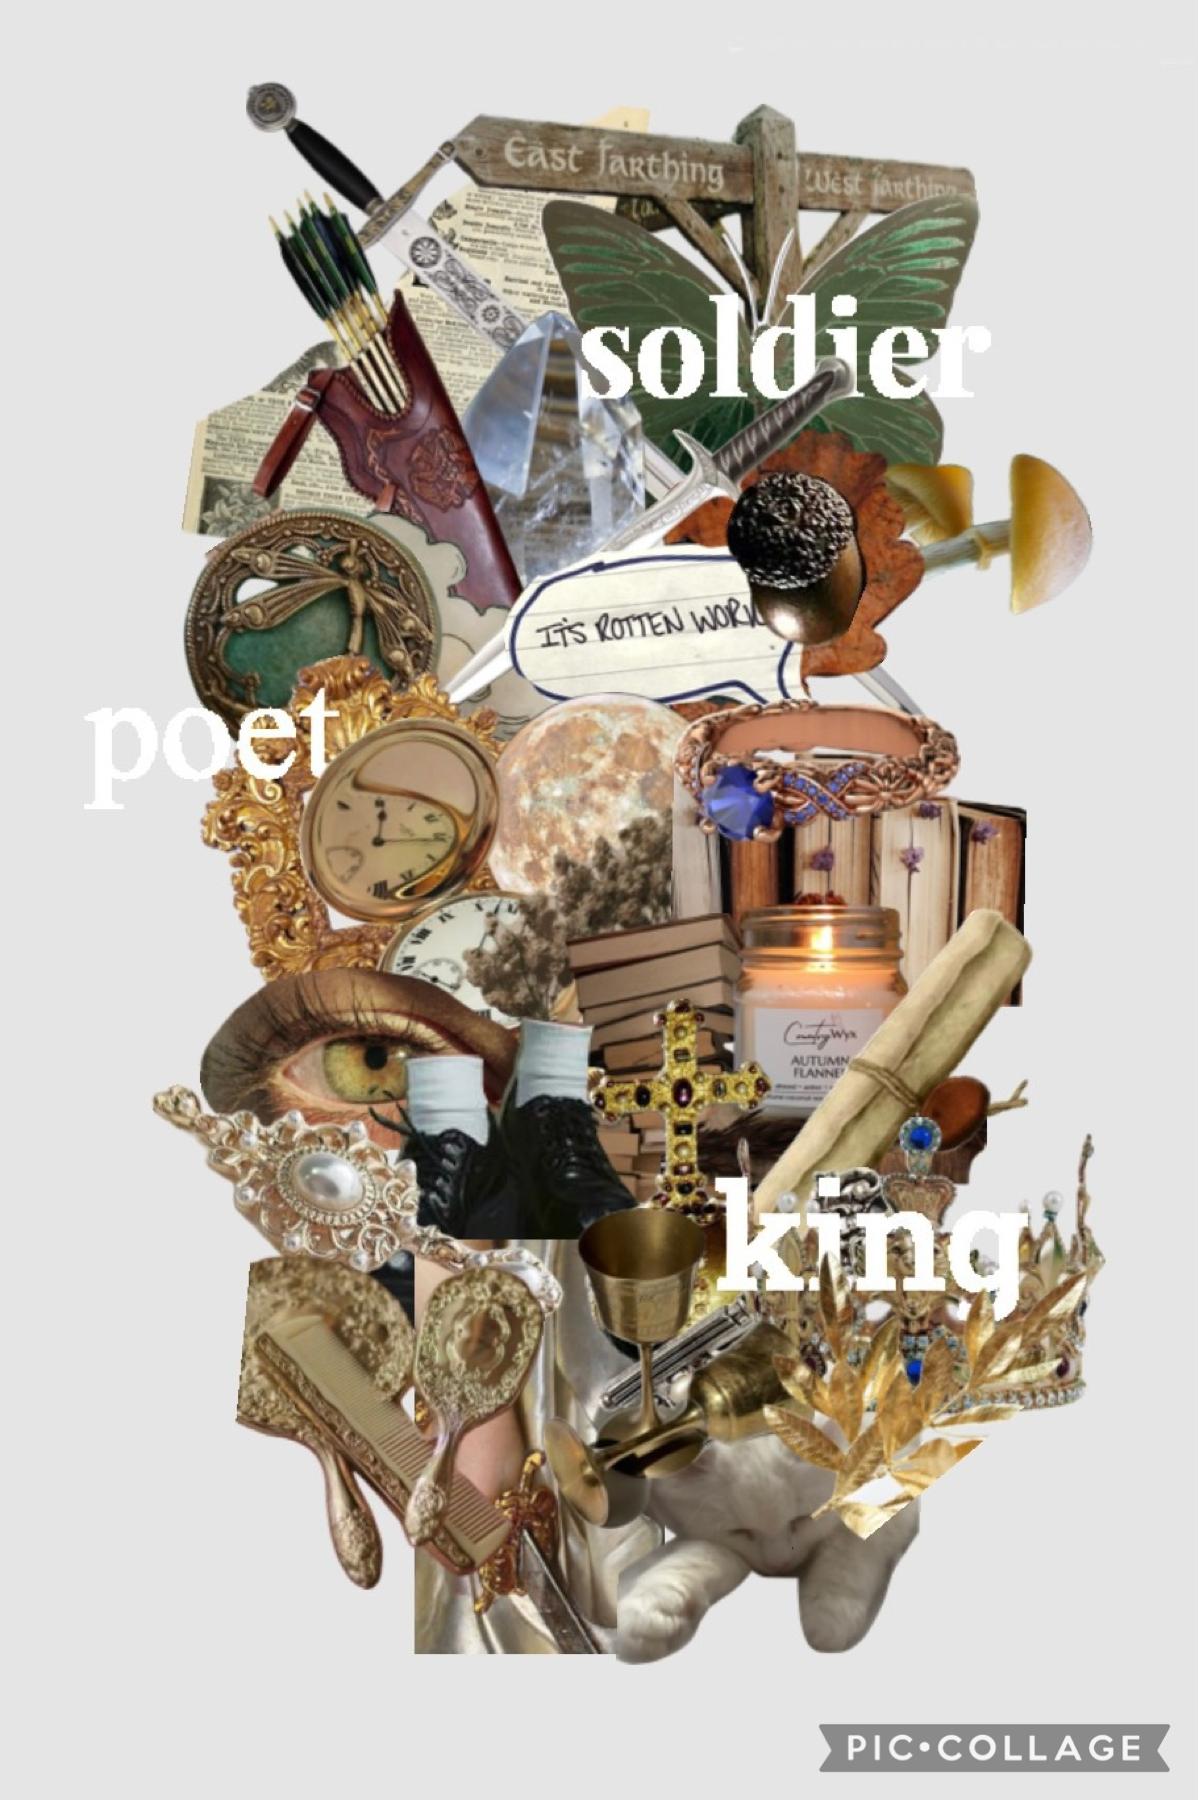 ⚔️📜👑 tap 👑📜⚔️

Soldier, Poet, King- The Oh Hellos 
used Pinterest Shuffles for this cos this app hates me swear lolll also this wont post i’m going insane  